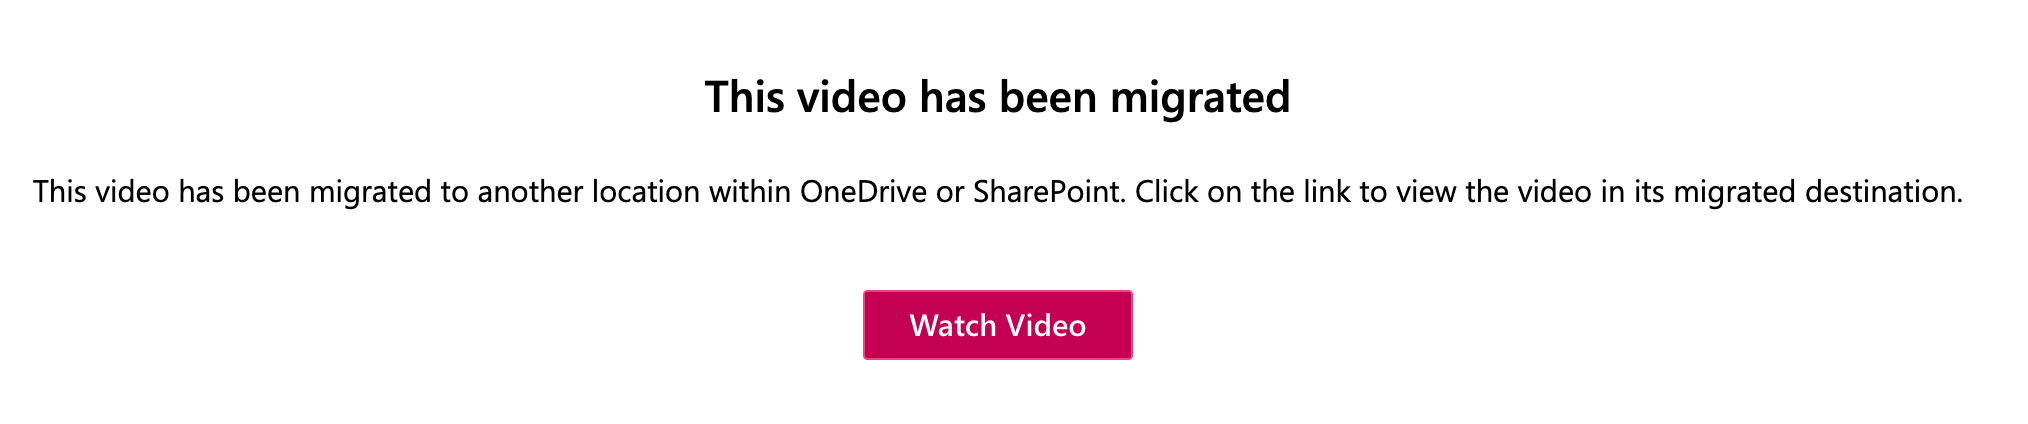 stream embed pop up with message'video has been migrated'